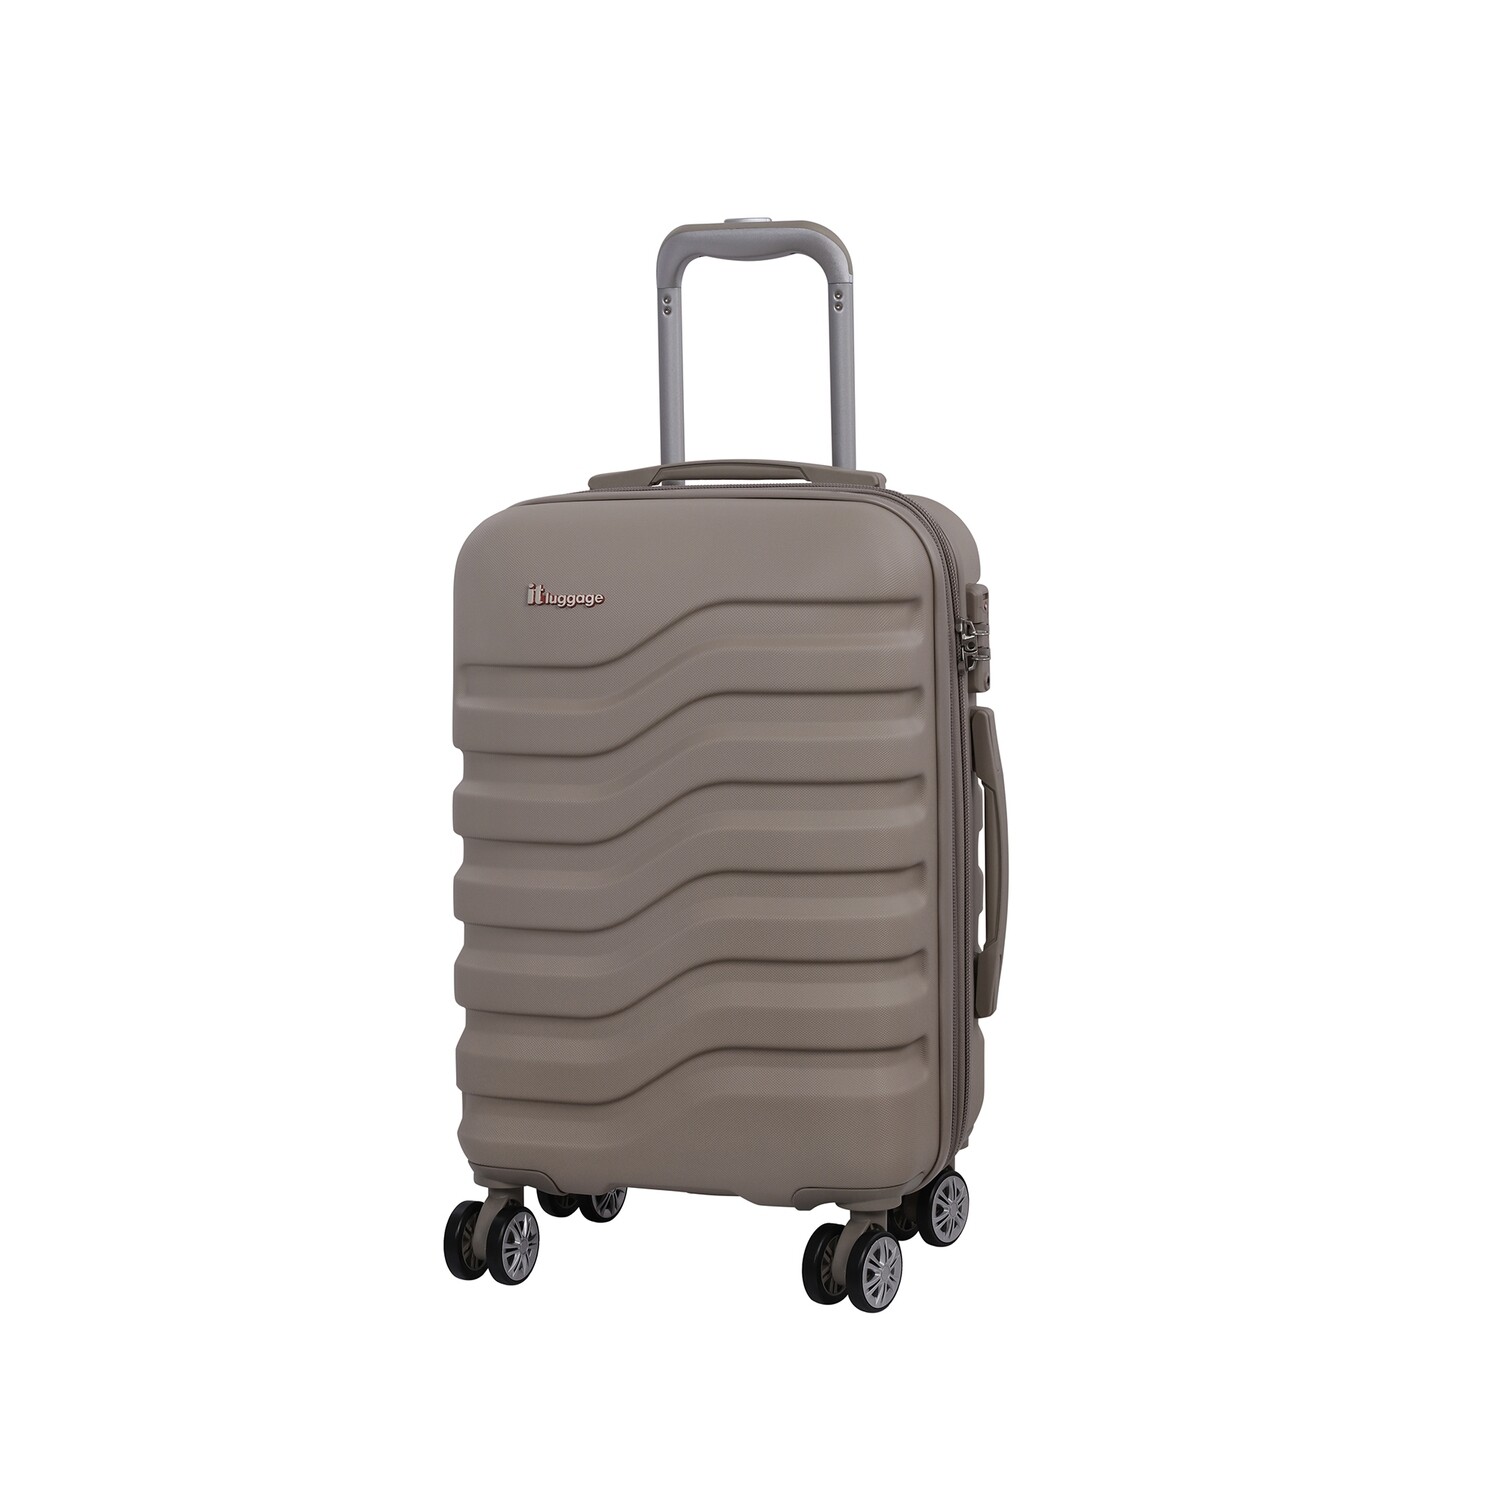 IT LUGGAGE SLIDER 21" STRONG TROLLEY COBBLESTONE